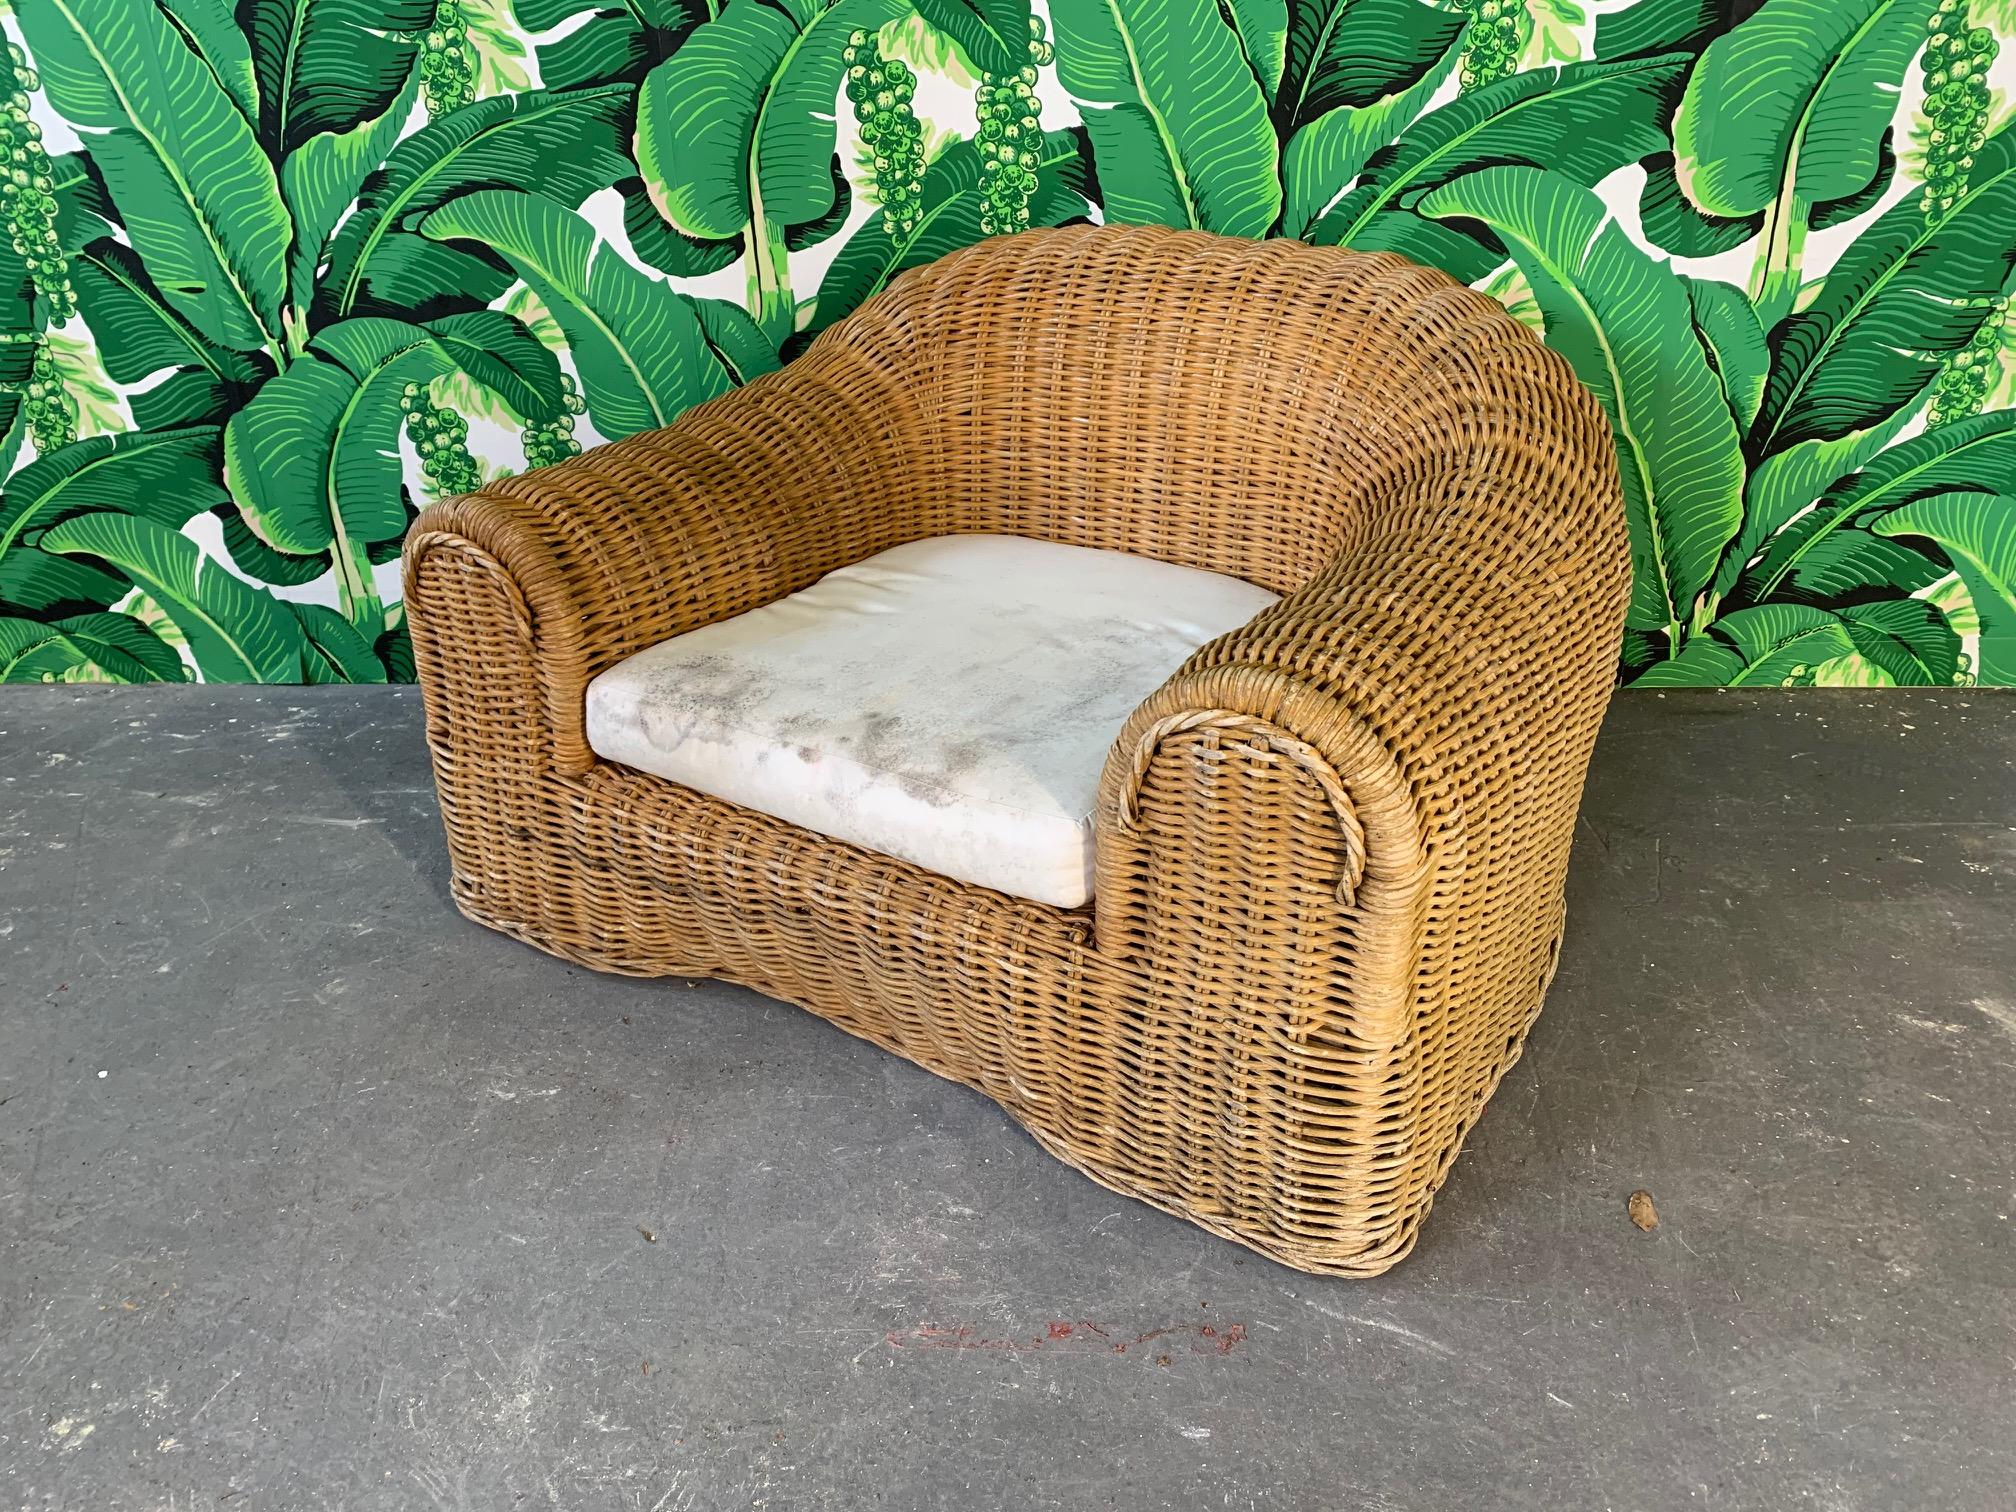 Sculptural wicker chair in the manner of Michael Taylor or Eero Aarnio. Good vintage condition with minor imperfections consistent with age. Includes cushion (has staining) but no upholstery.